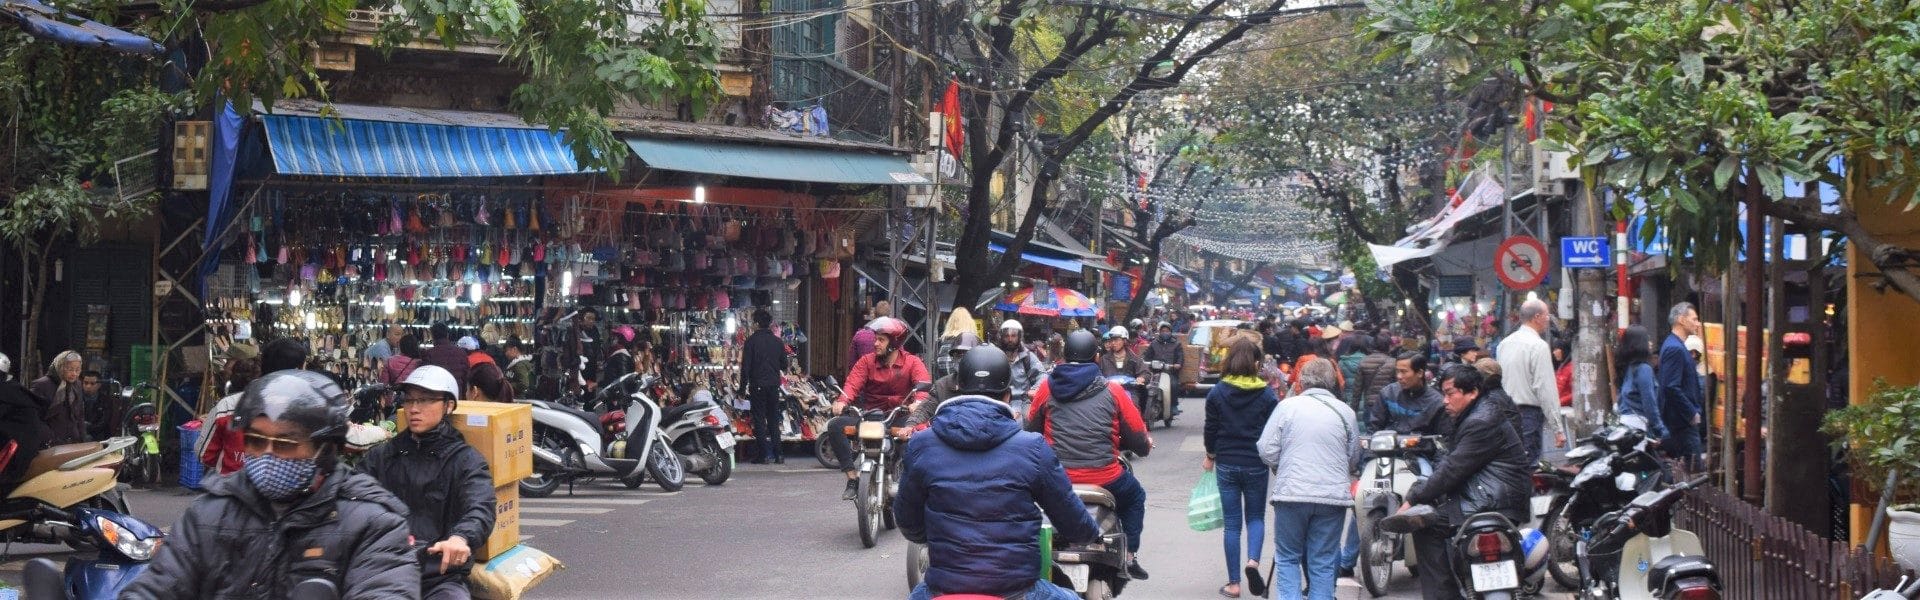 Busy street view with motorcycles and pedestrians - Things to do backpacking Vietnam on a Budget